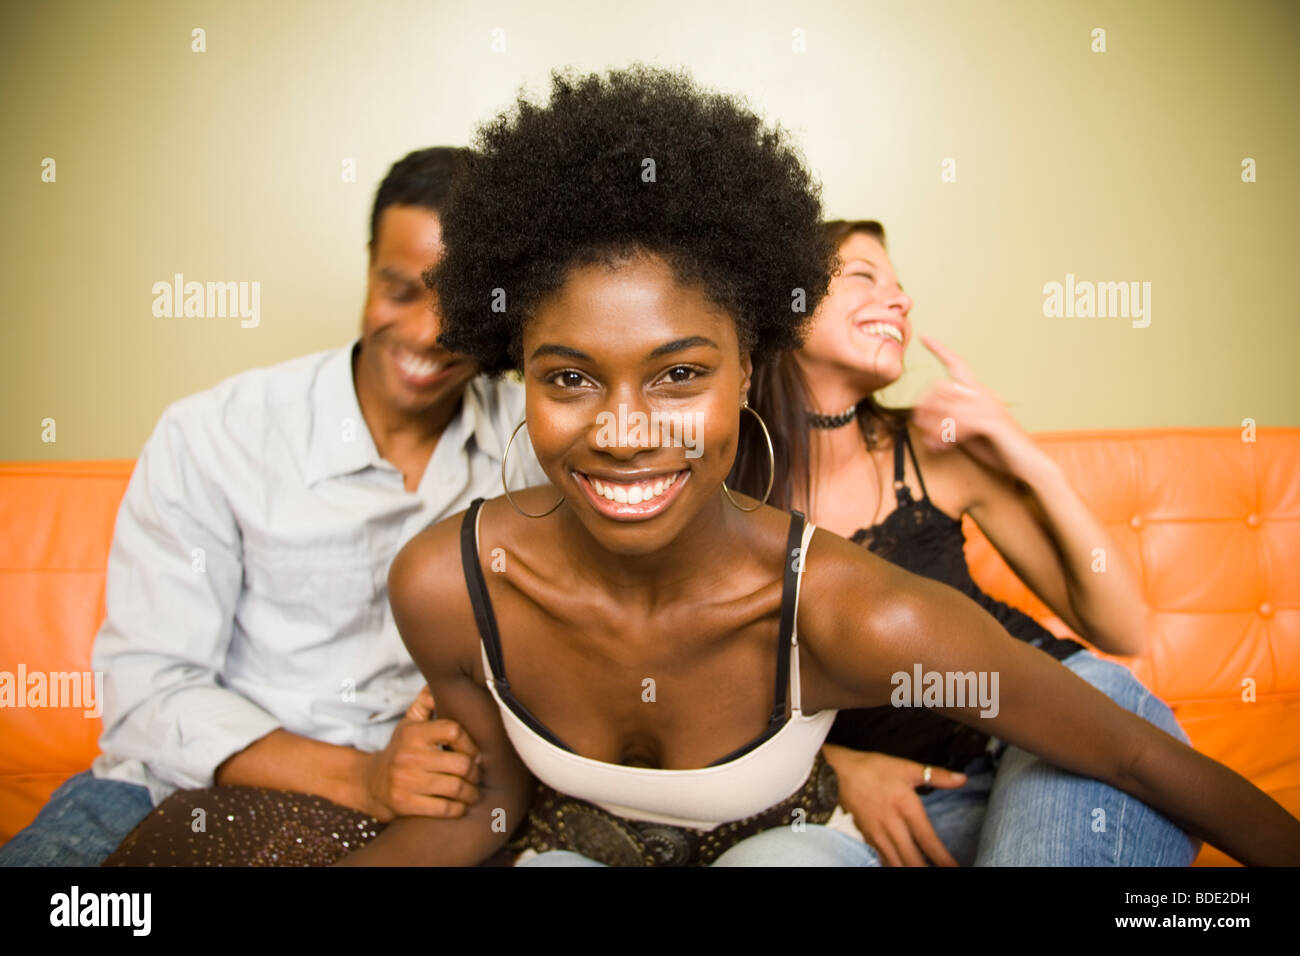 Young group of friends having fun together Stock Photo